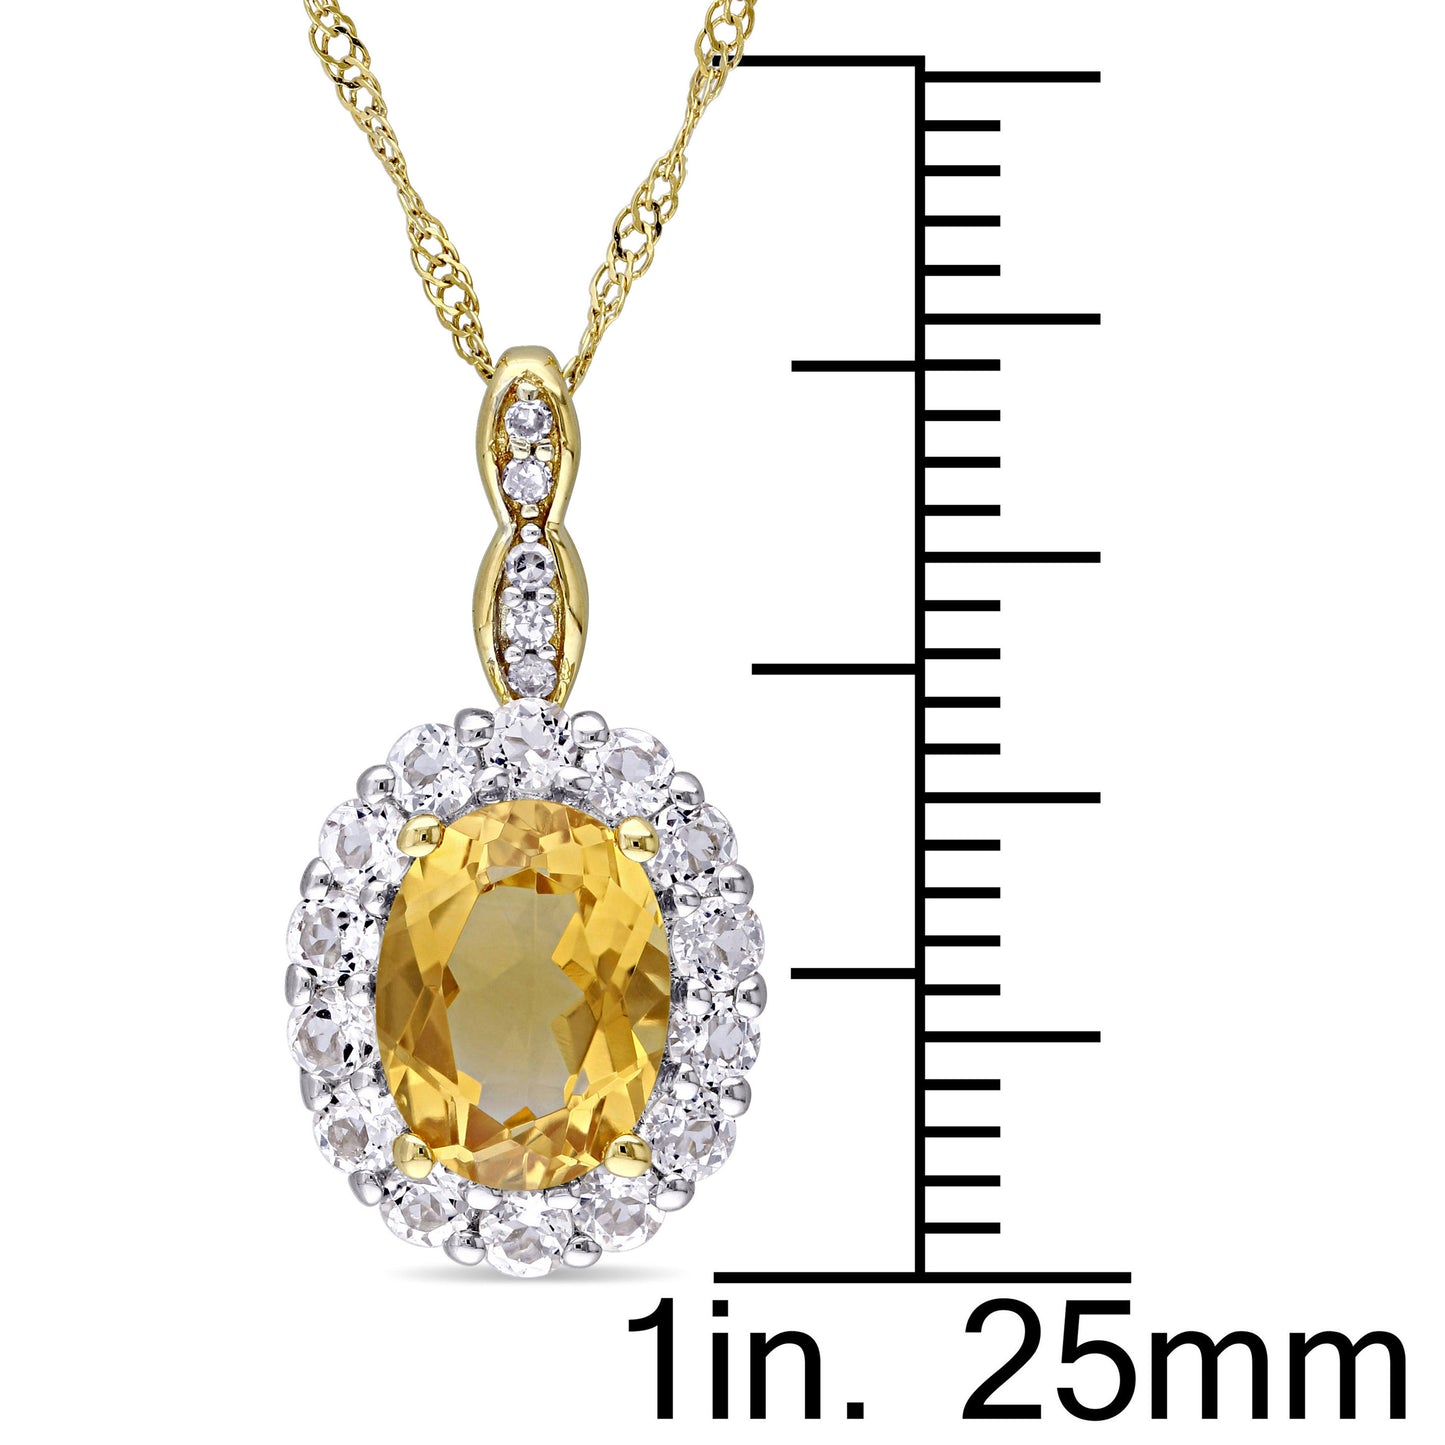 Oval Cut Citrine & White Topaz Halo Necklace in 14k Yellow Gold